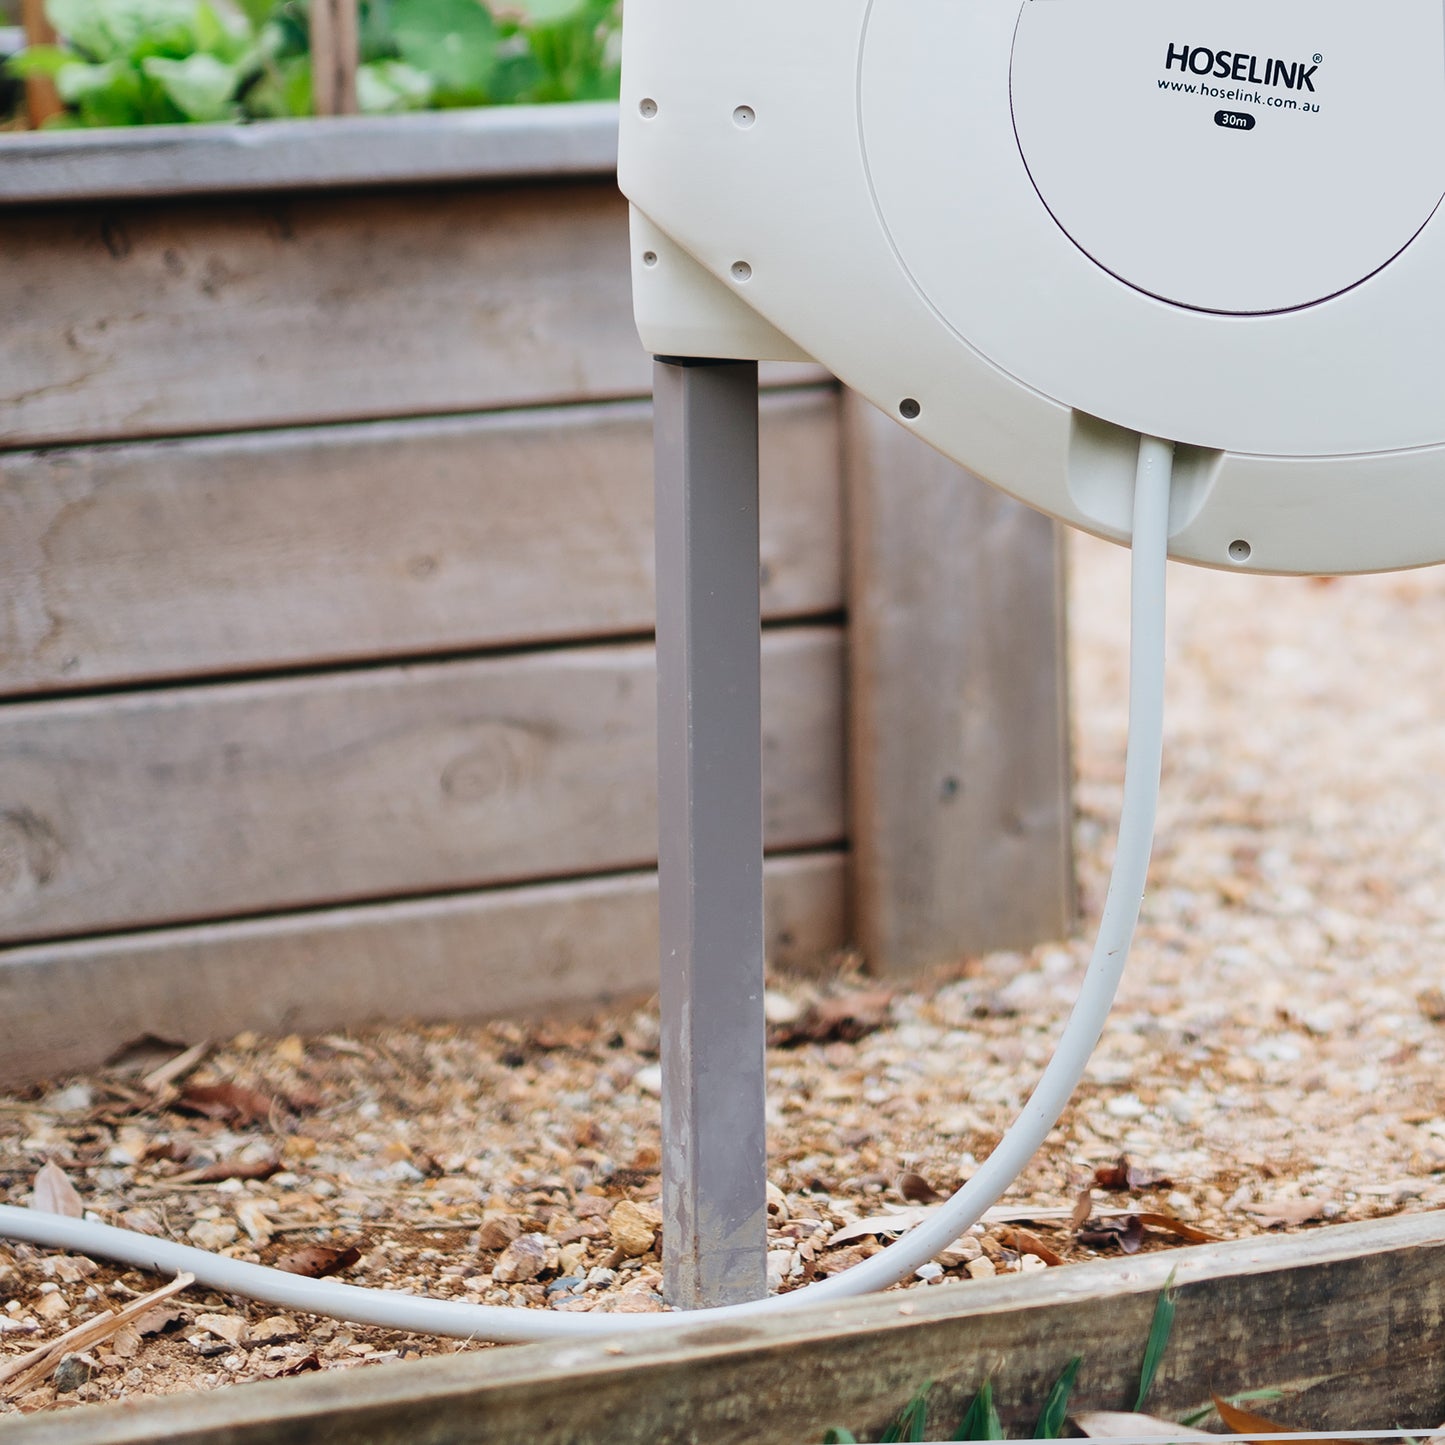 Beige retractable hose reel mounted onto a grey powdered coated stainless steel post in a garden bed